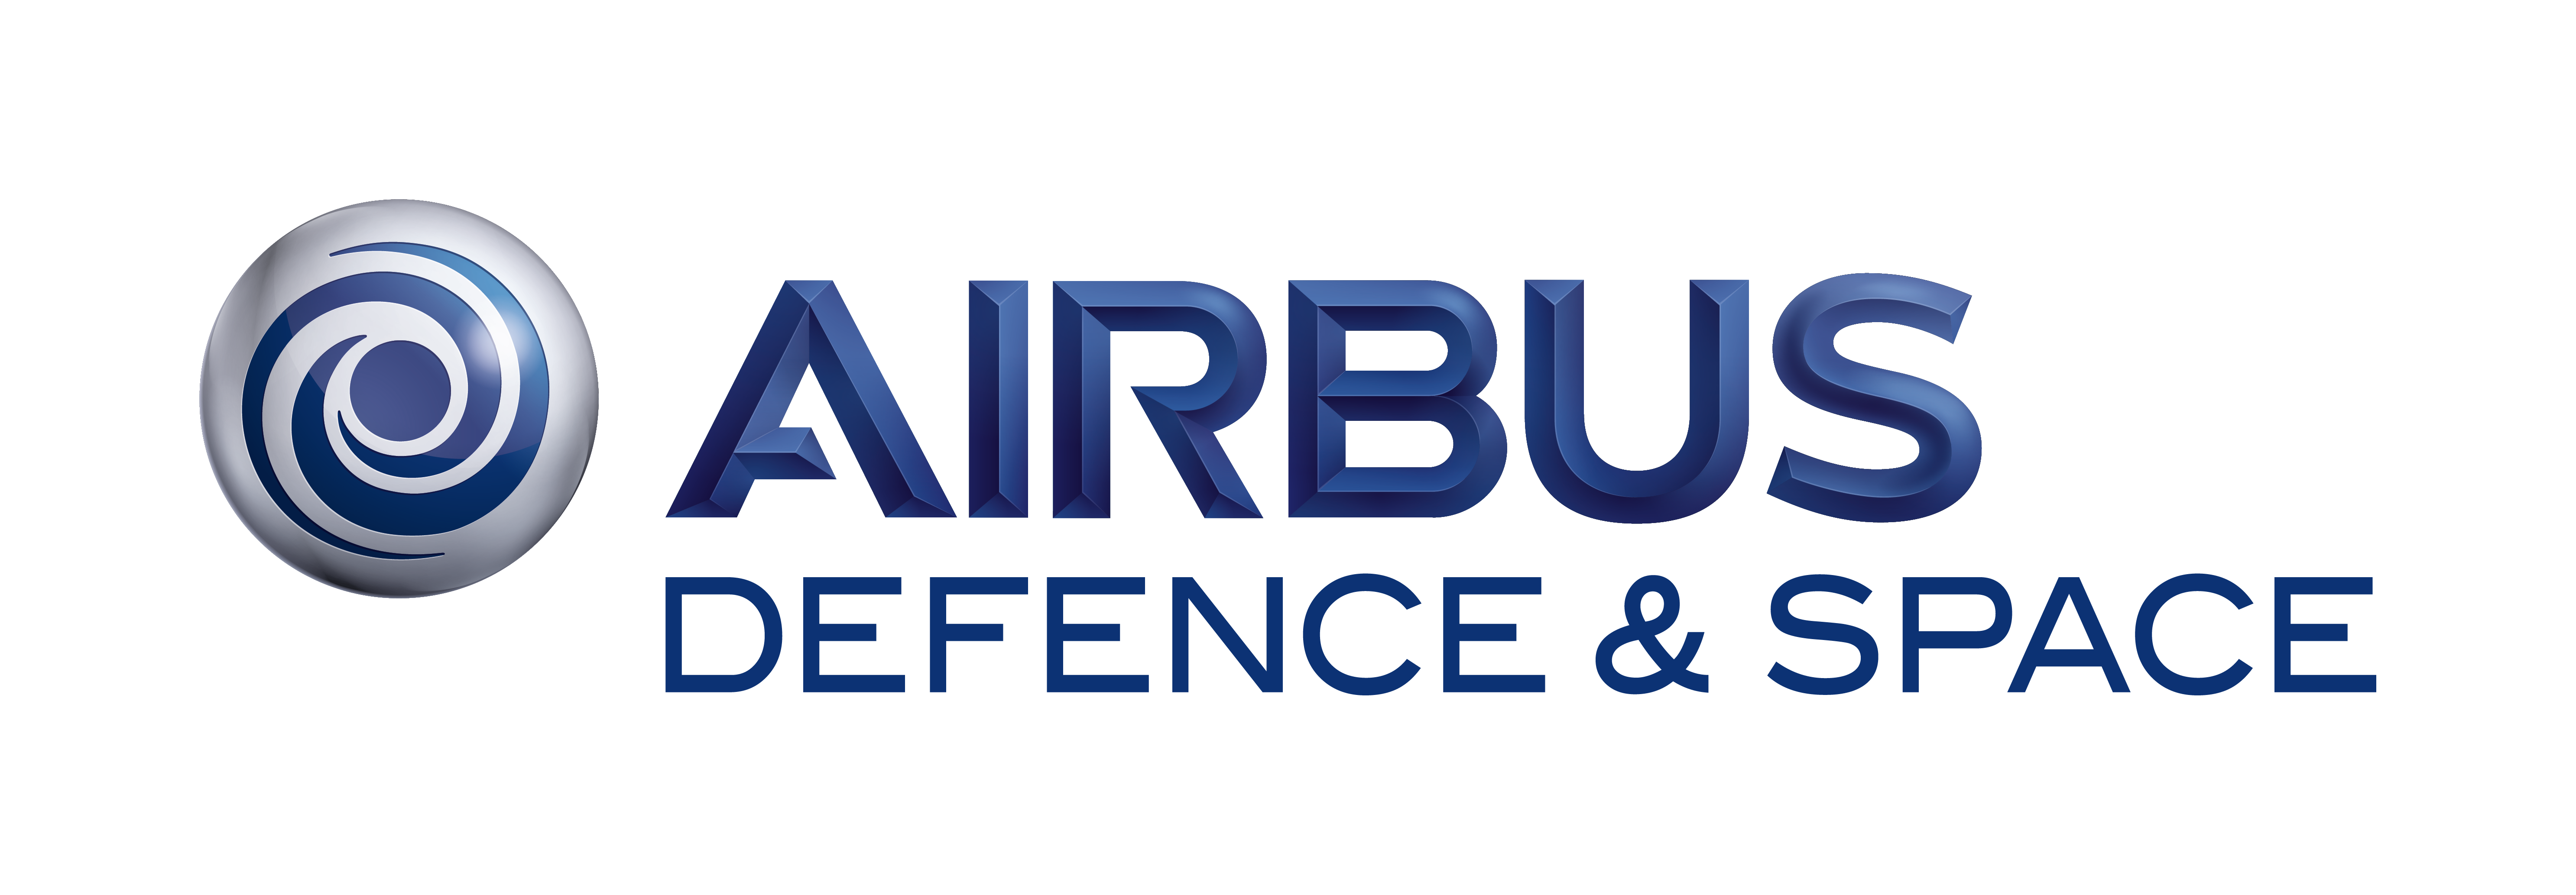 Airbus Defence And Space Dein Ausbildungsbetrieb | Azubis.de Airbus Logo Png - Airbus, Transparent background PNG HD thumbnail